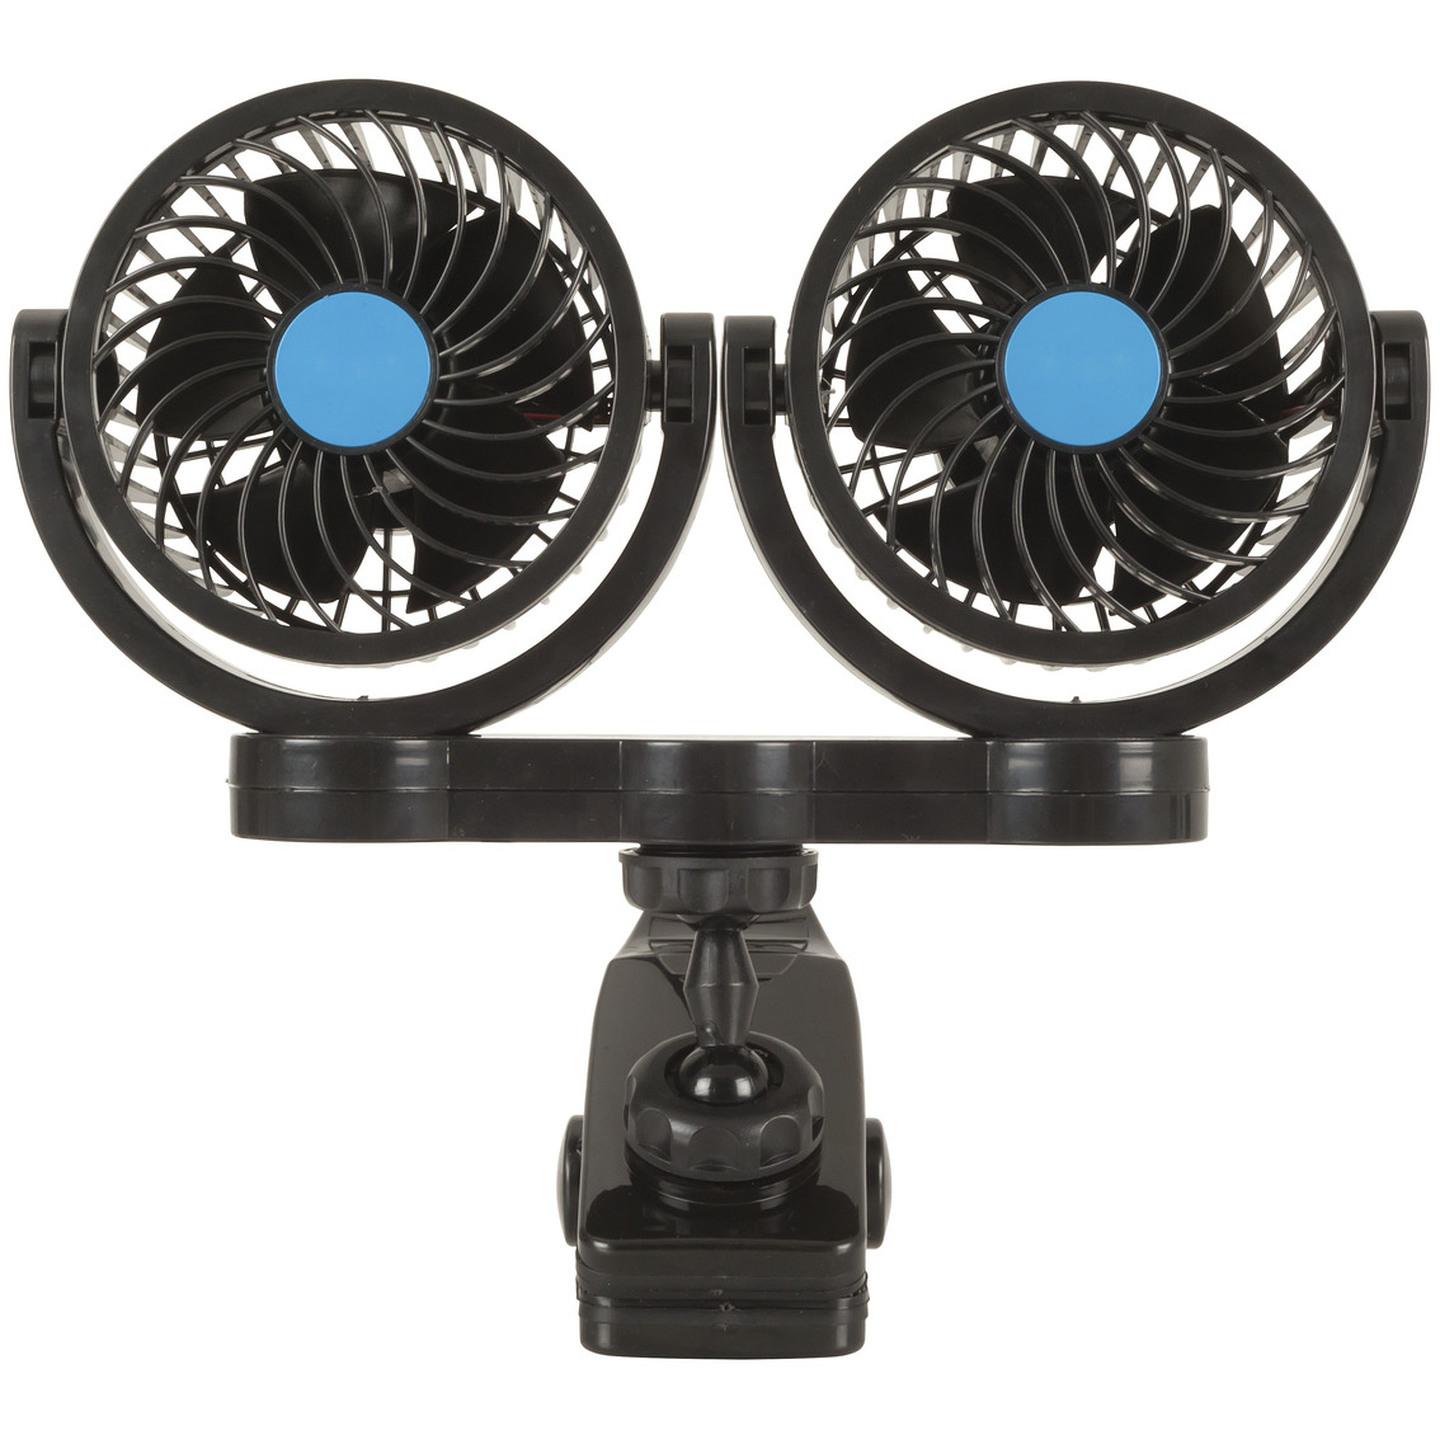 Dual 100mm 12V Fans with Clamp Mount